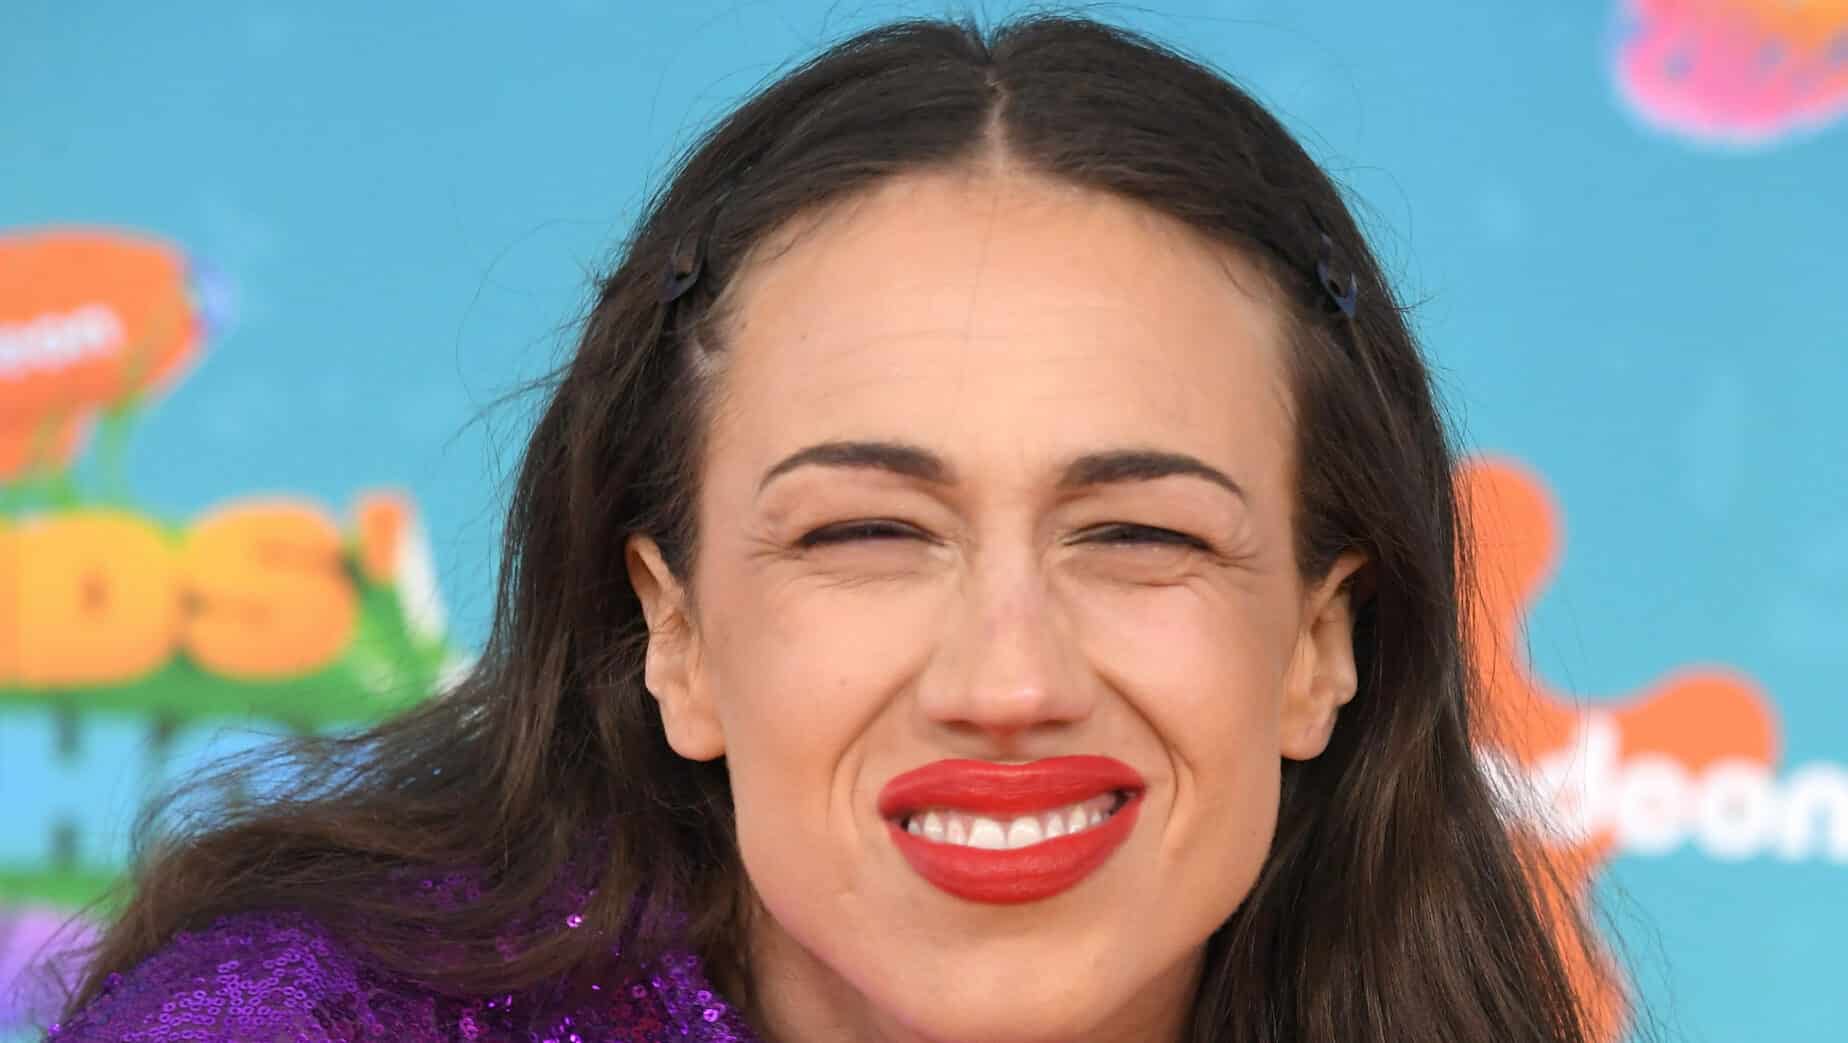 LOS ANGELES, CALIFORNIA - MARCH 04: Colleen Ballinger, Miranda Sings arrives at the Nickelodeon's 2023 Kids' Choice Awards at Microsoft Theater on March 04, 2023 in Los Angeles, California.